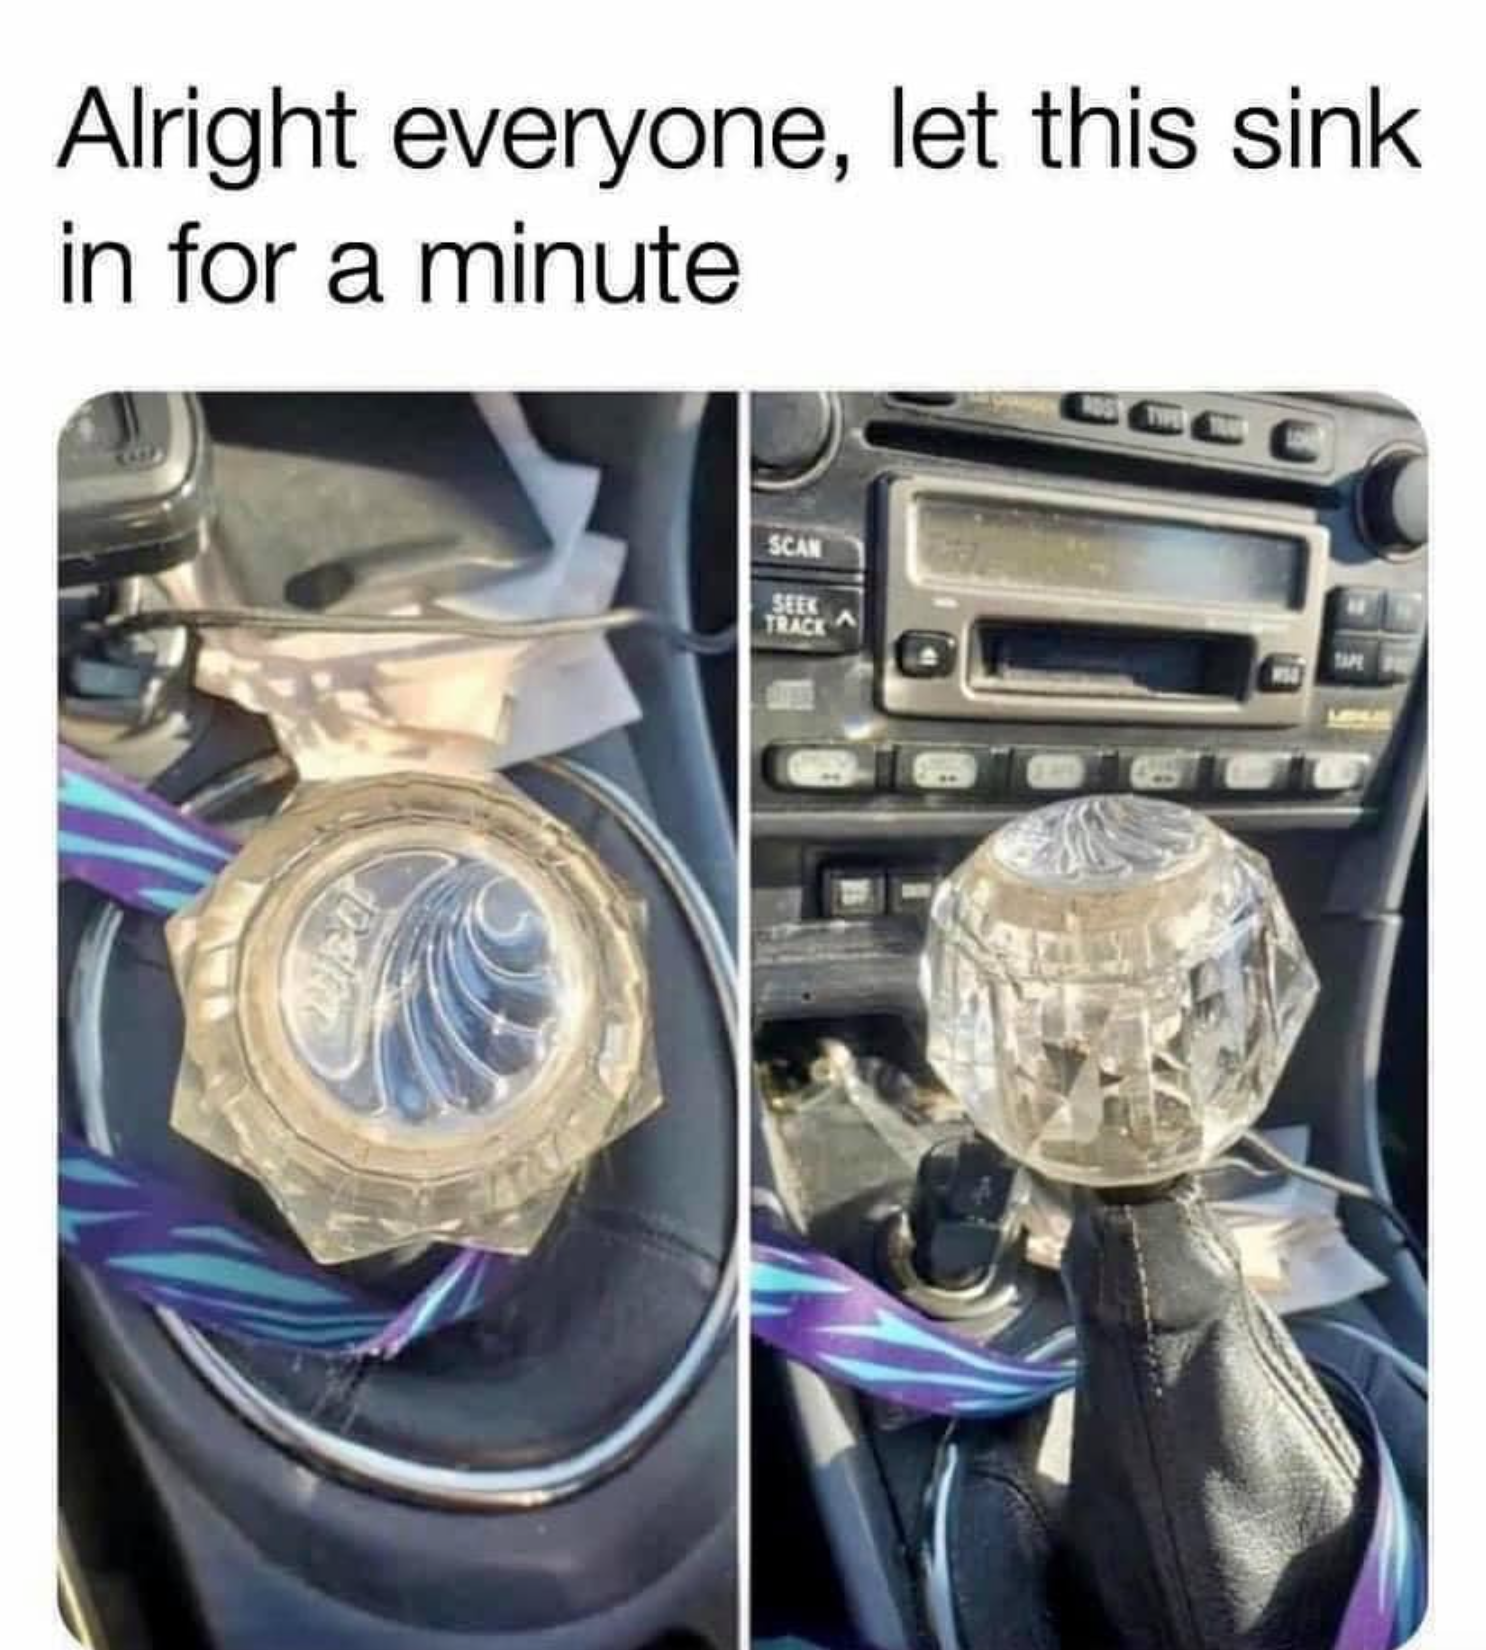 sink shift knob - Alright everyone, let this sink in for a minute